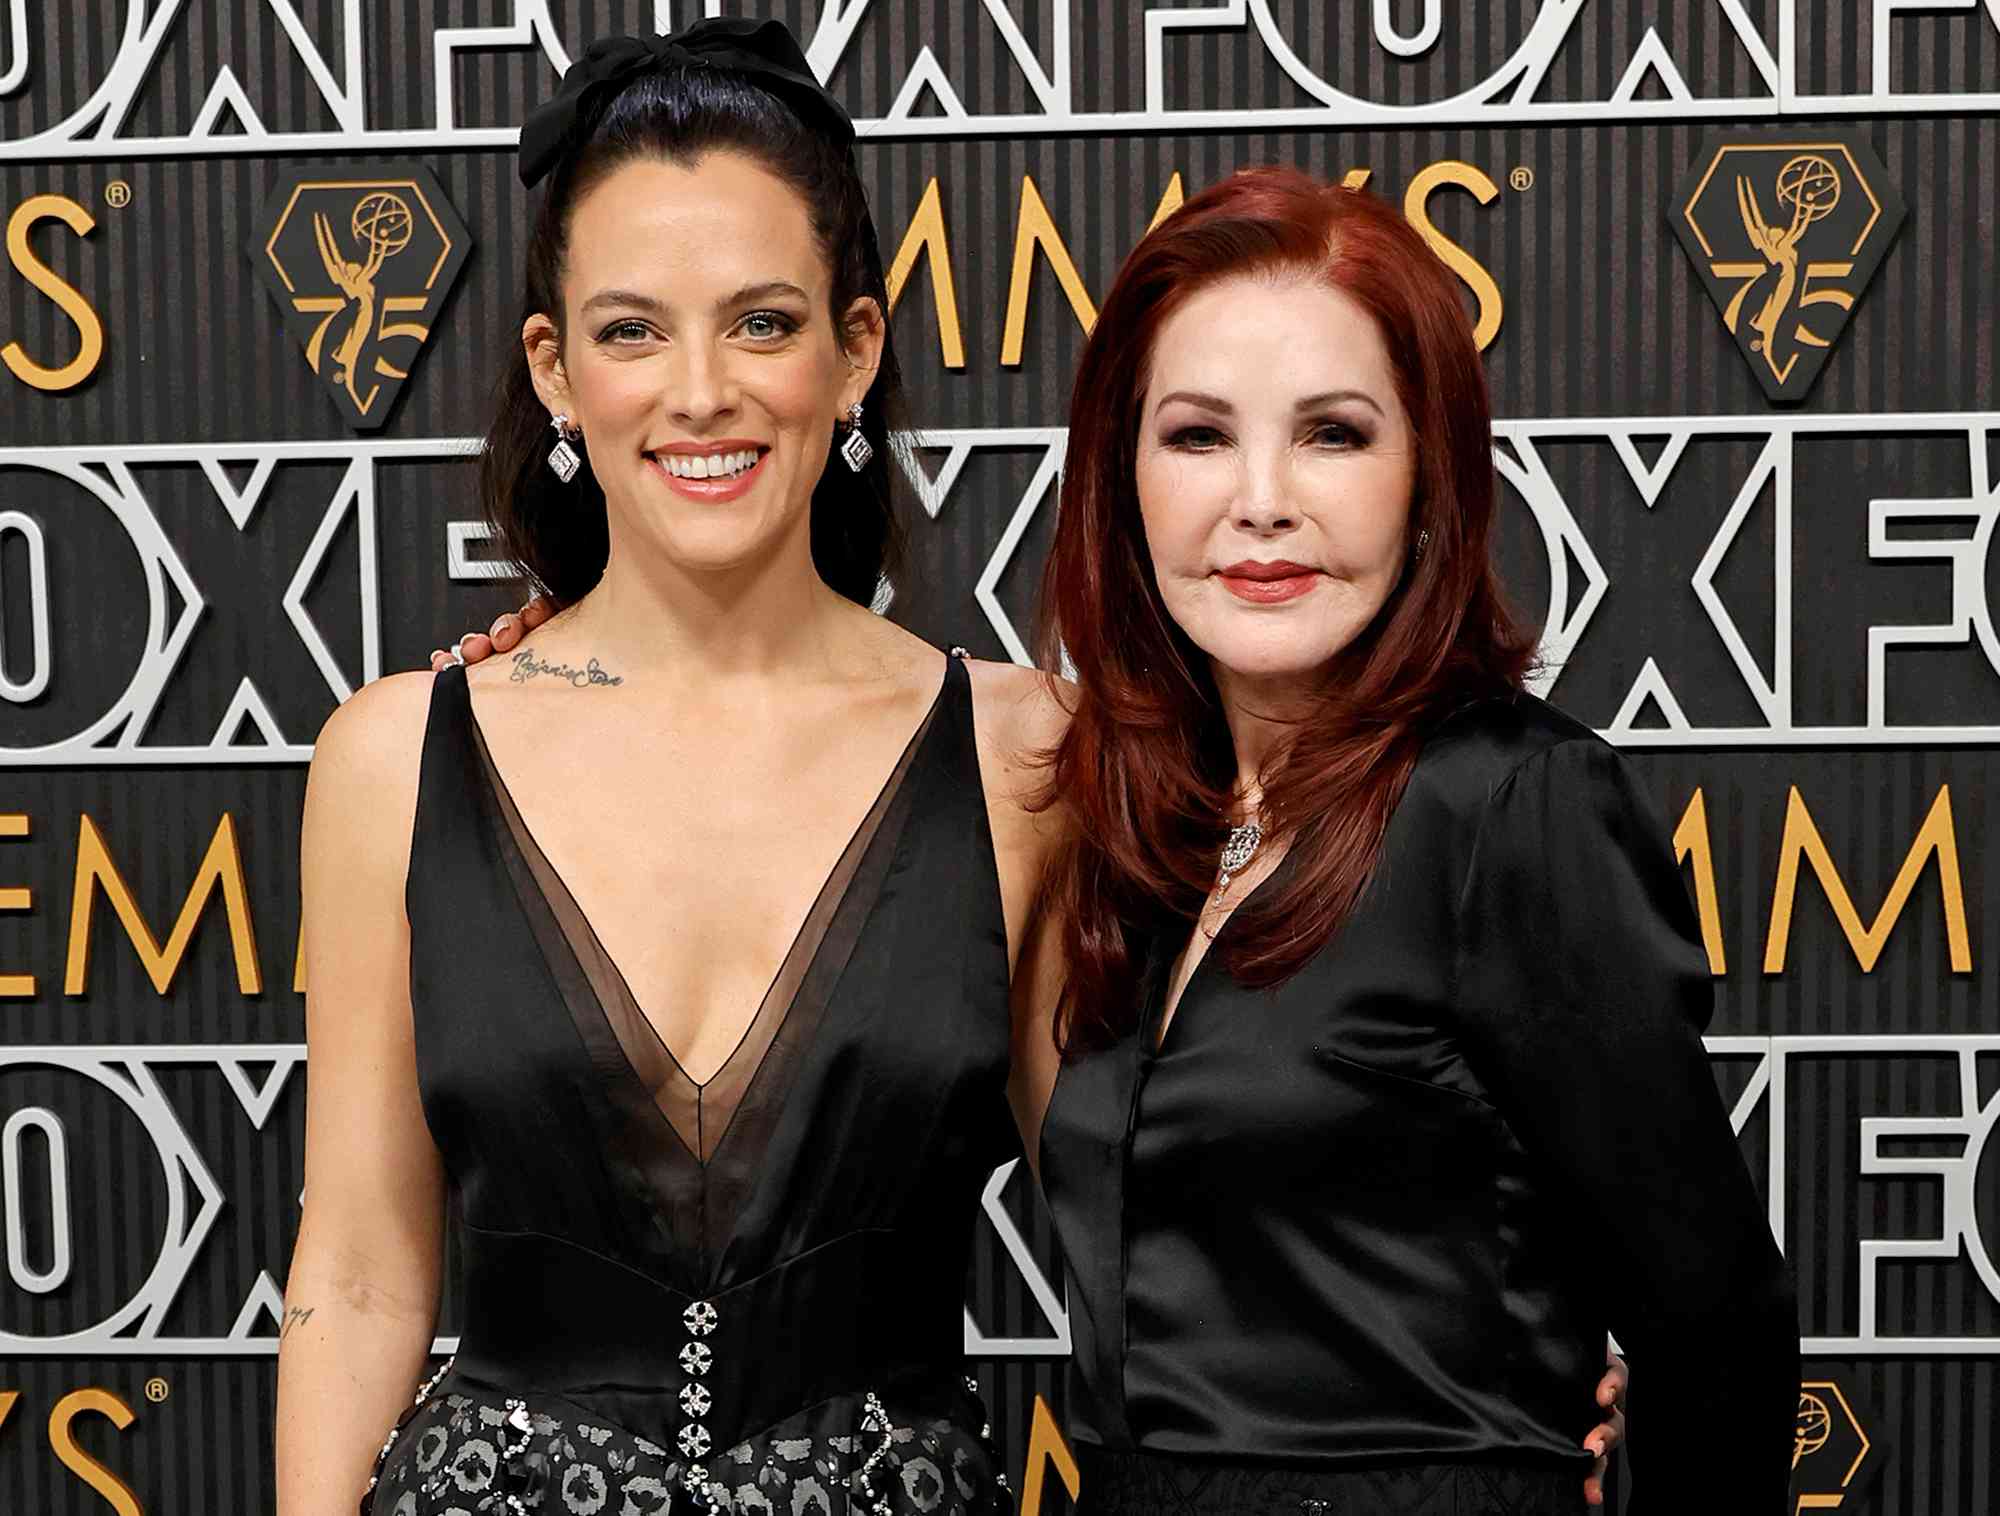 Priscilla Presley Celebrates 79th Birthday with Granddaughter Riley Keough in Photos Shared by Her Son